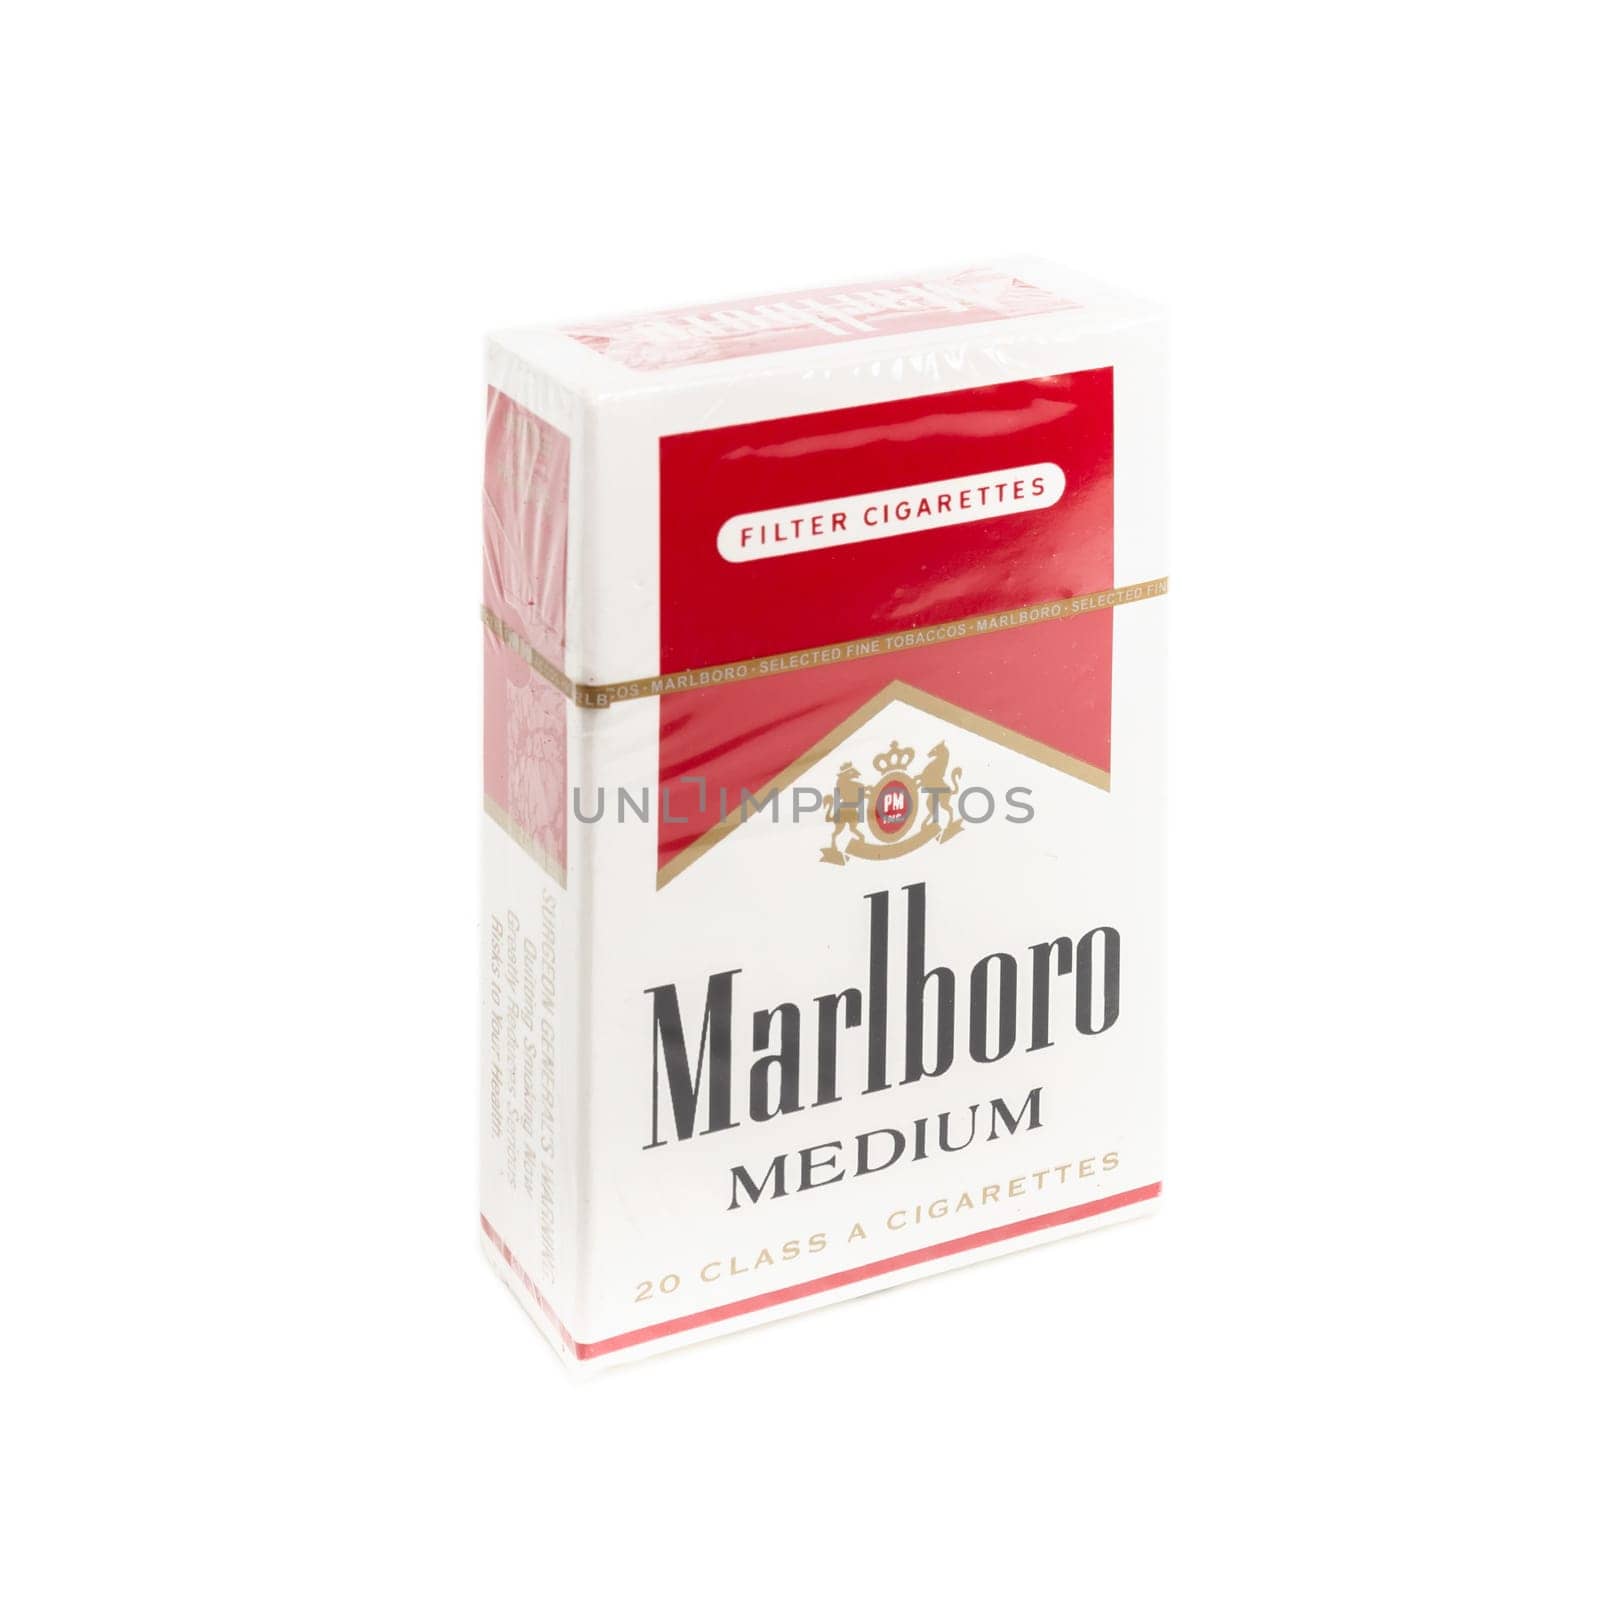 Pack of Marlboro Medium Cigarettes, made by Philip Morris. Marlboro is the largest selling brand of cigarettes in the world. Bergamo, ITALY - March 24, 2021.